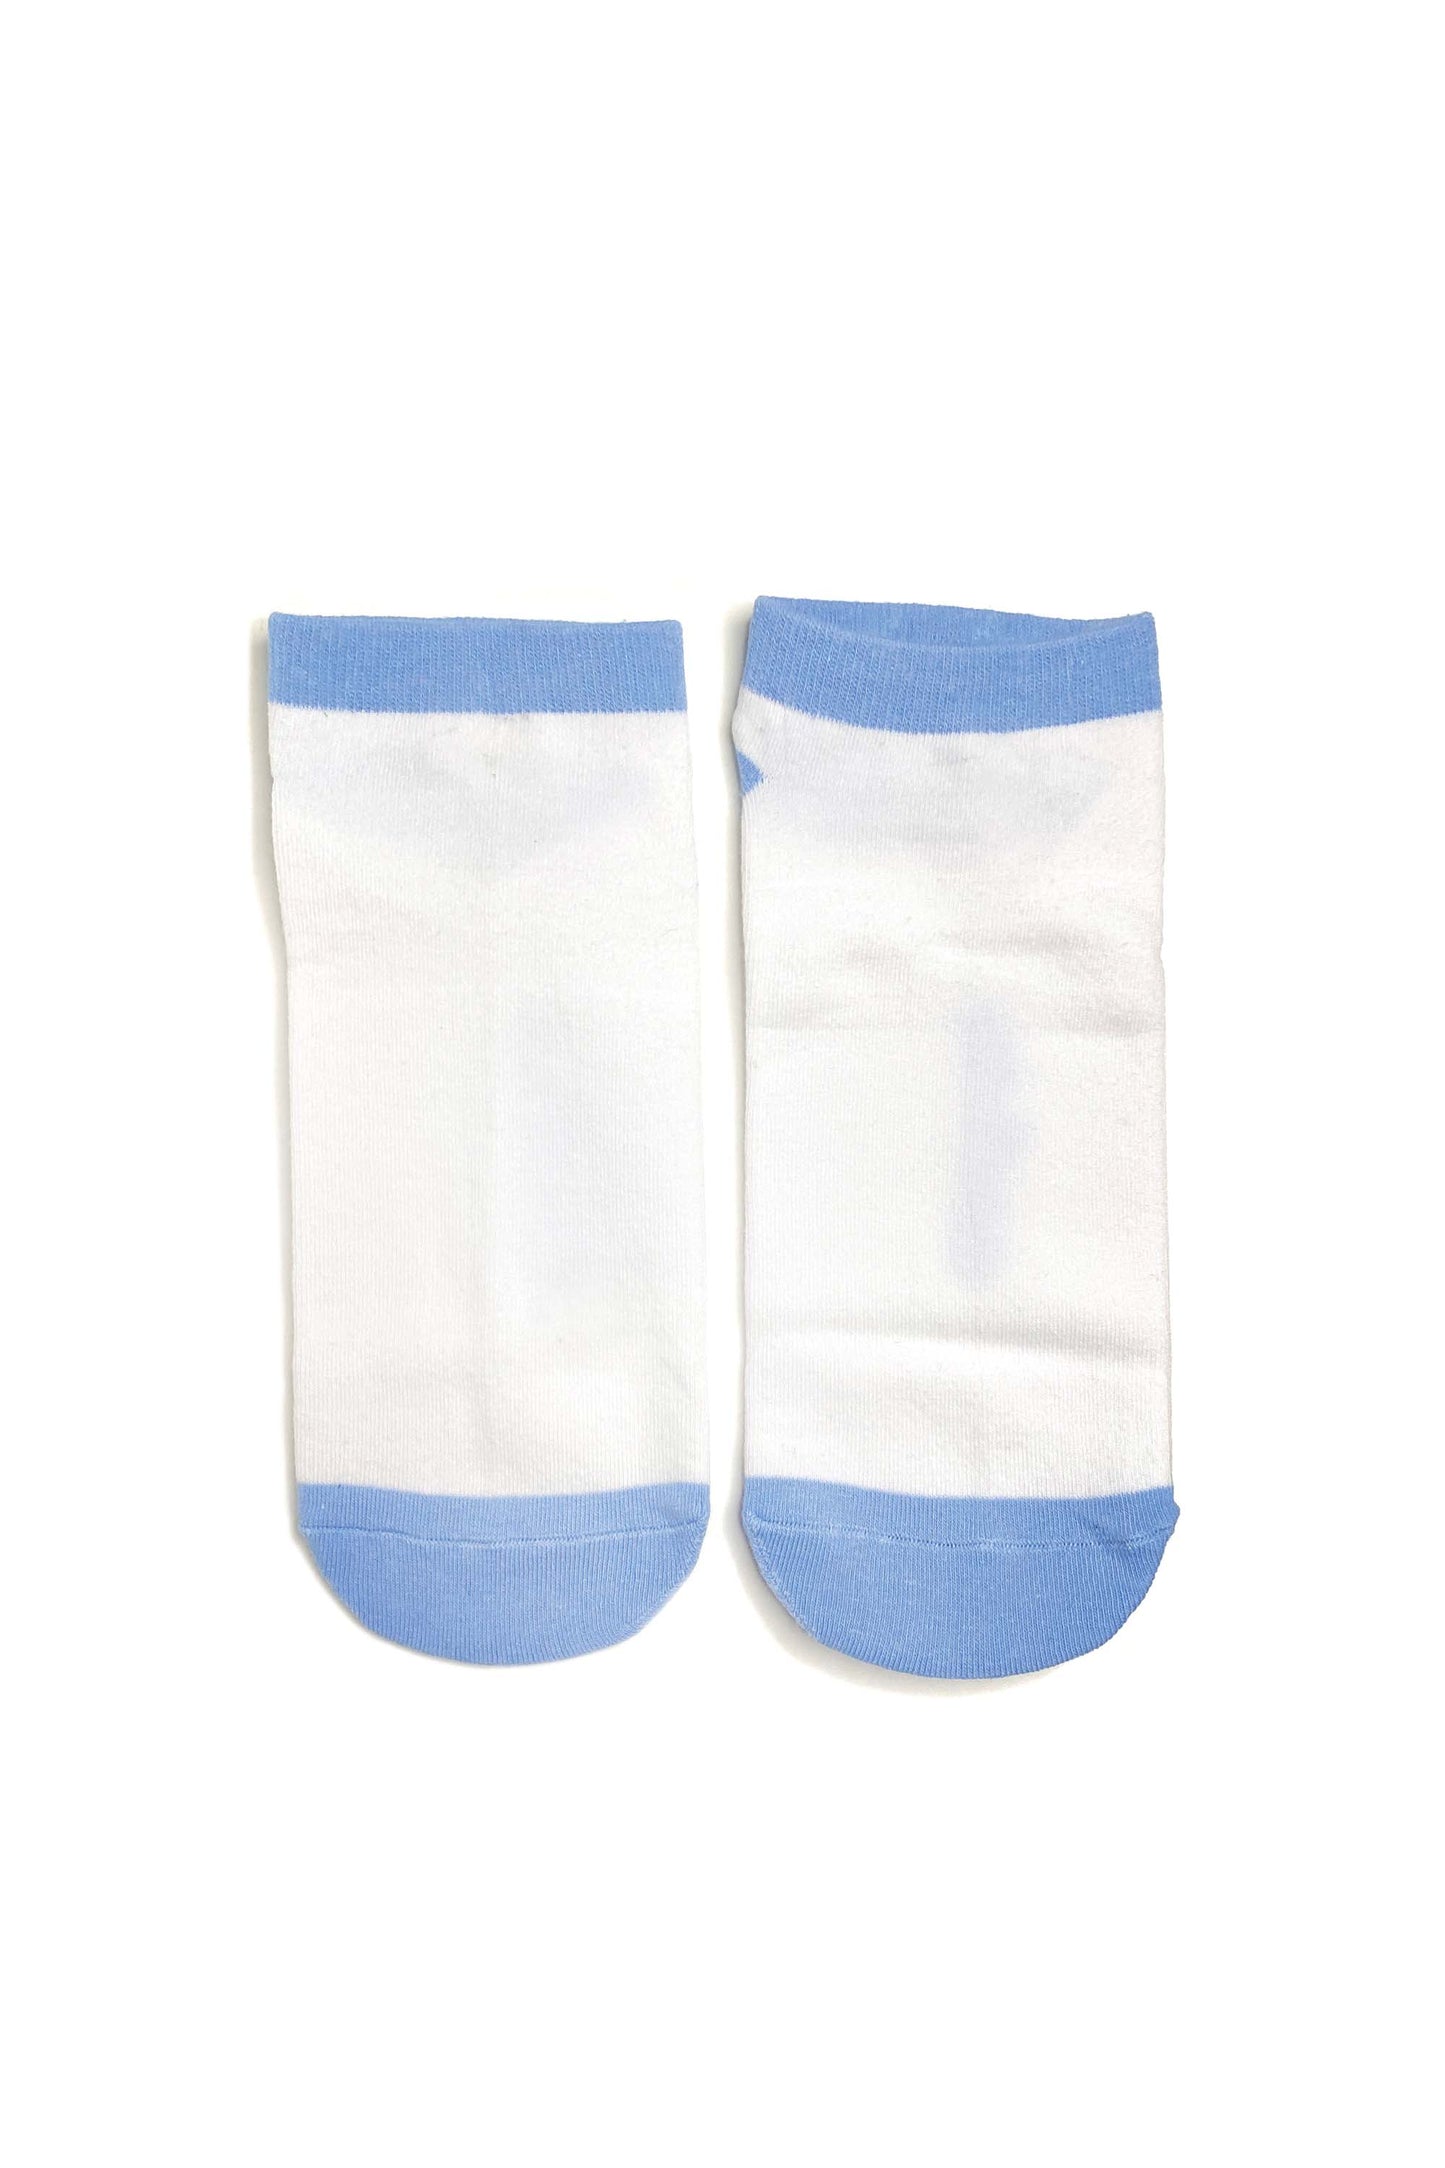 Adult Ankle Sock Box | 6 pairs